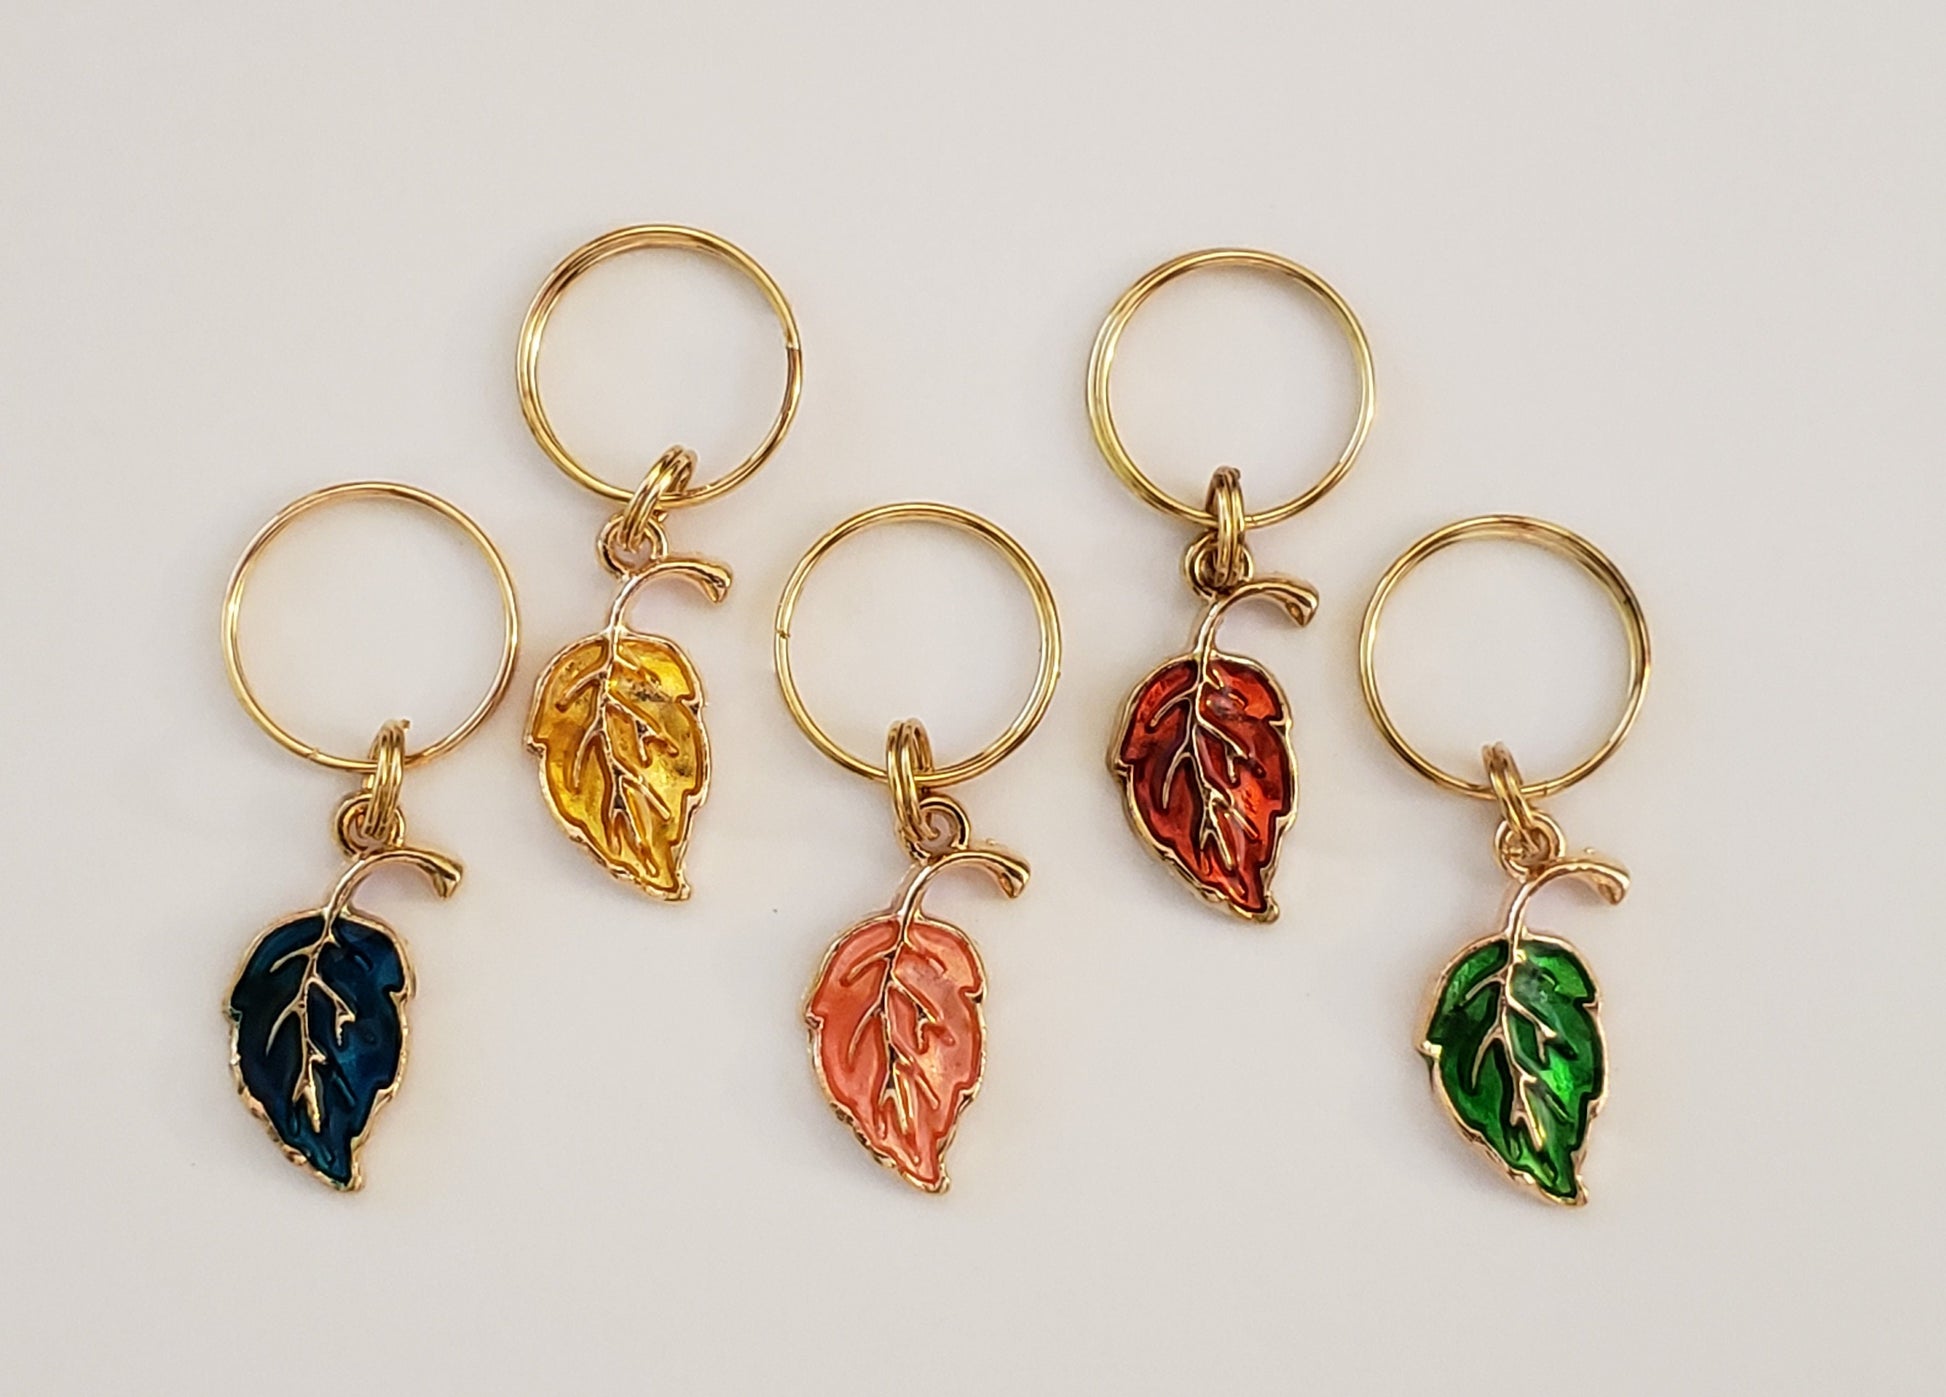 Leaves Stitch Markers for Knitting, 5pc set jewel oil drop | Crochet stitch marker, progress keeper, project bag charms, crochet accessories